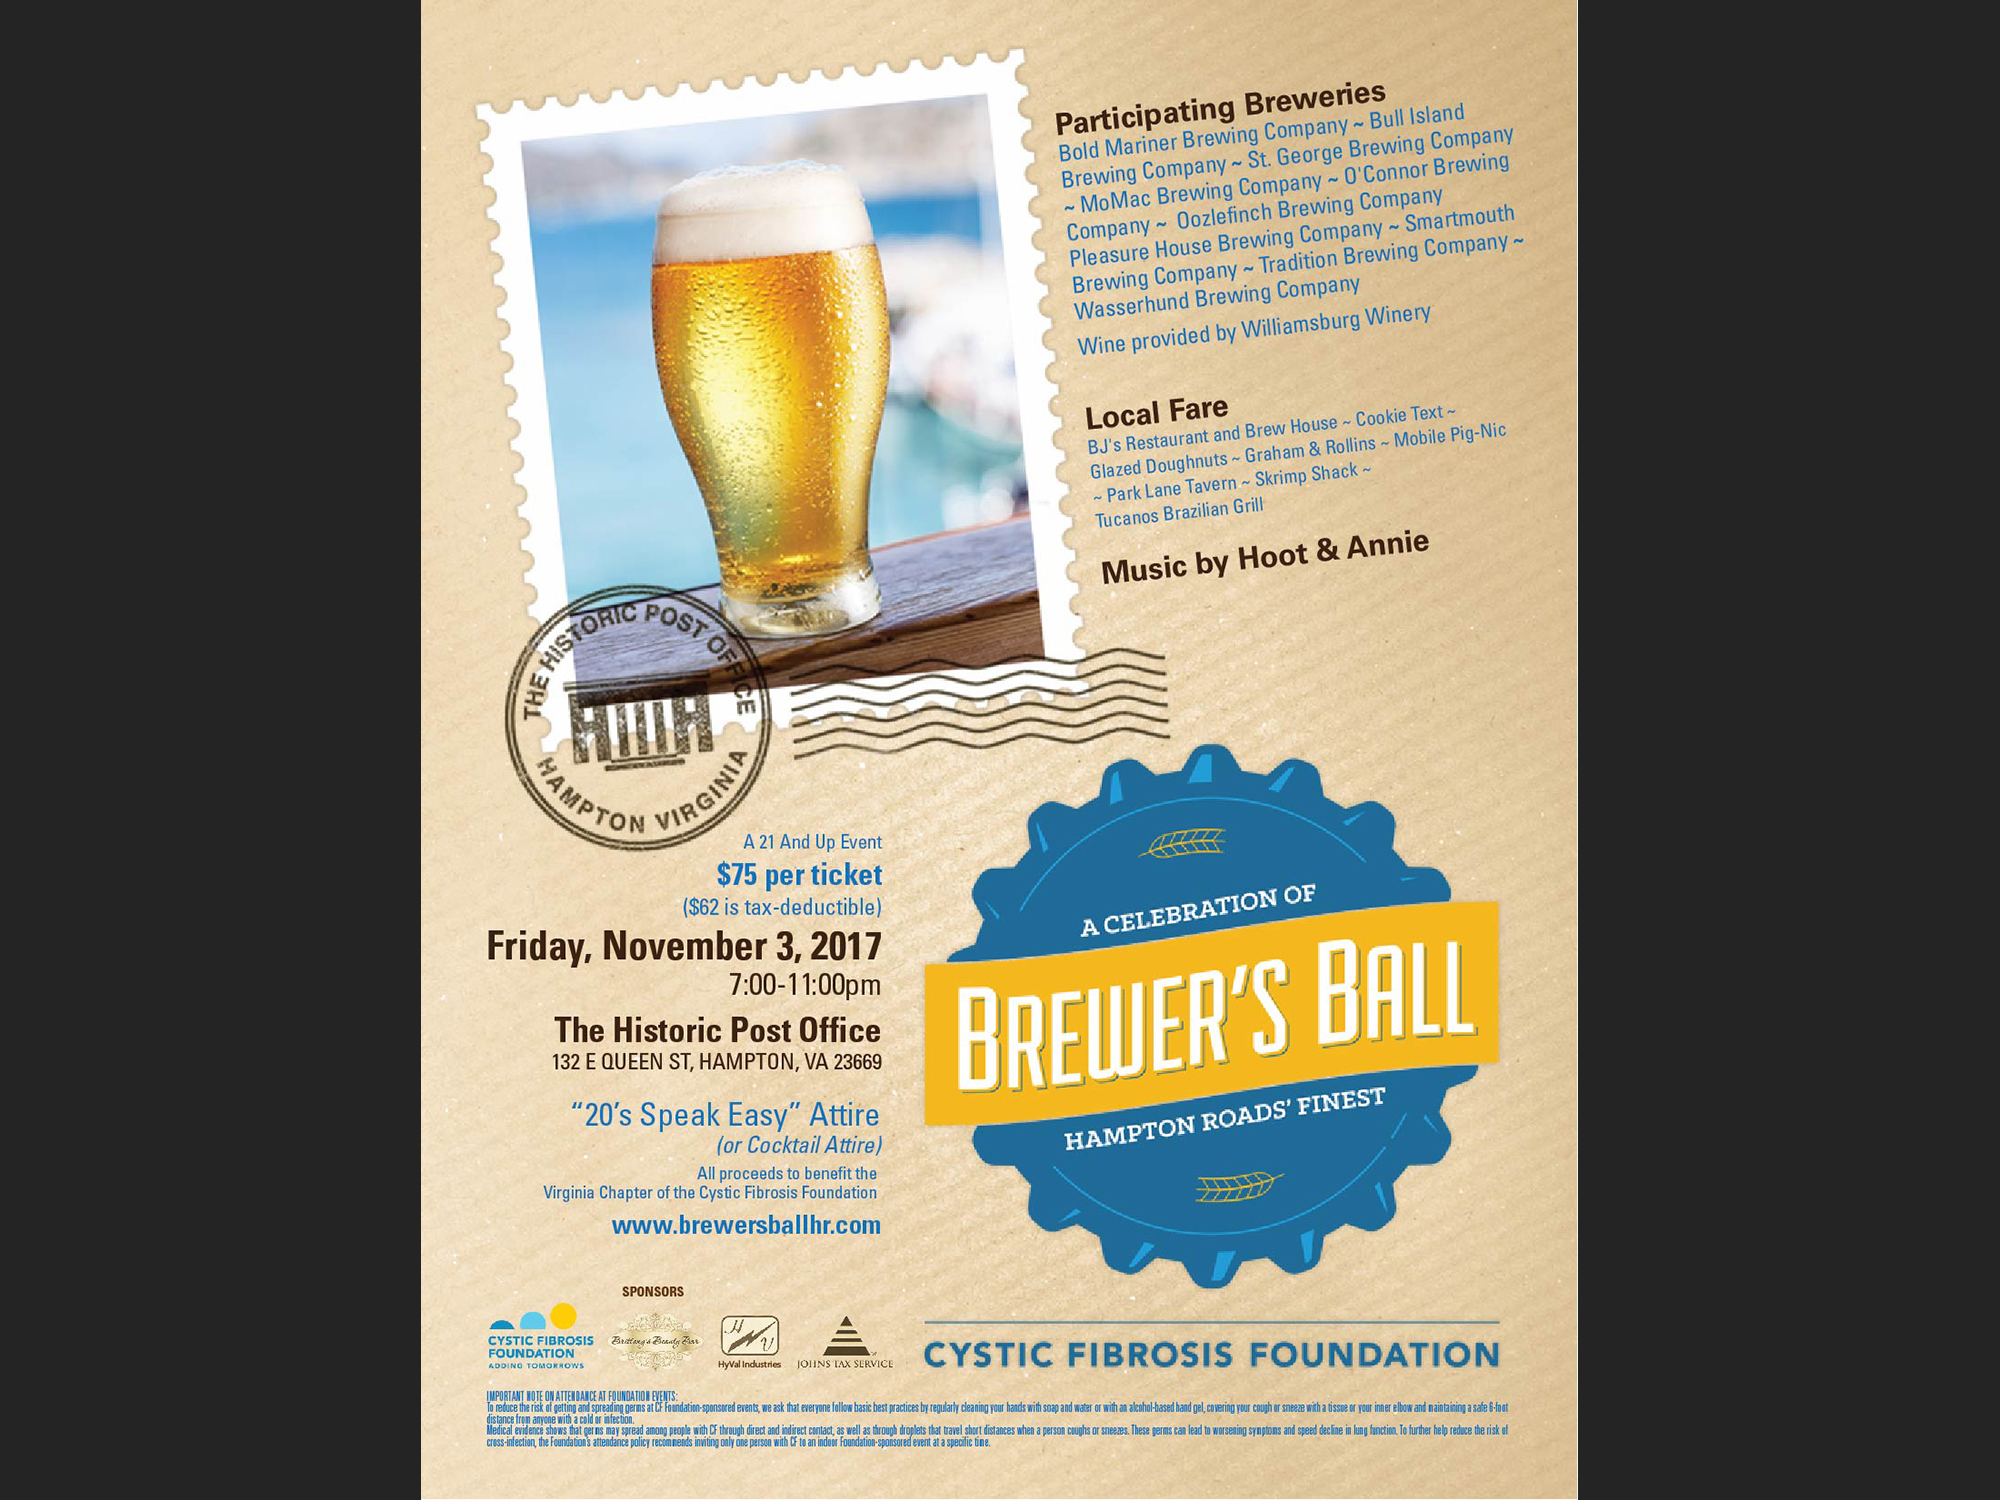 Brewer's Ball - Cystic Fibrosis Foundation, 2017; poster/flyer.